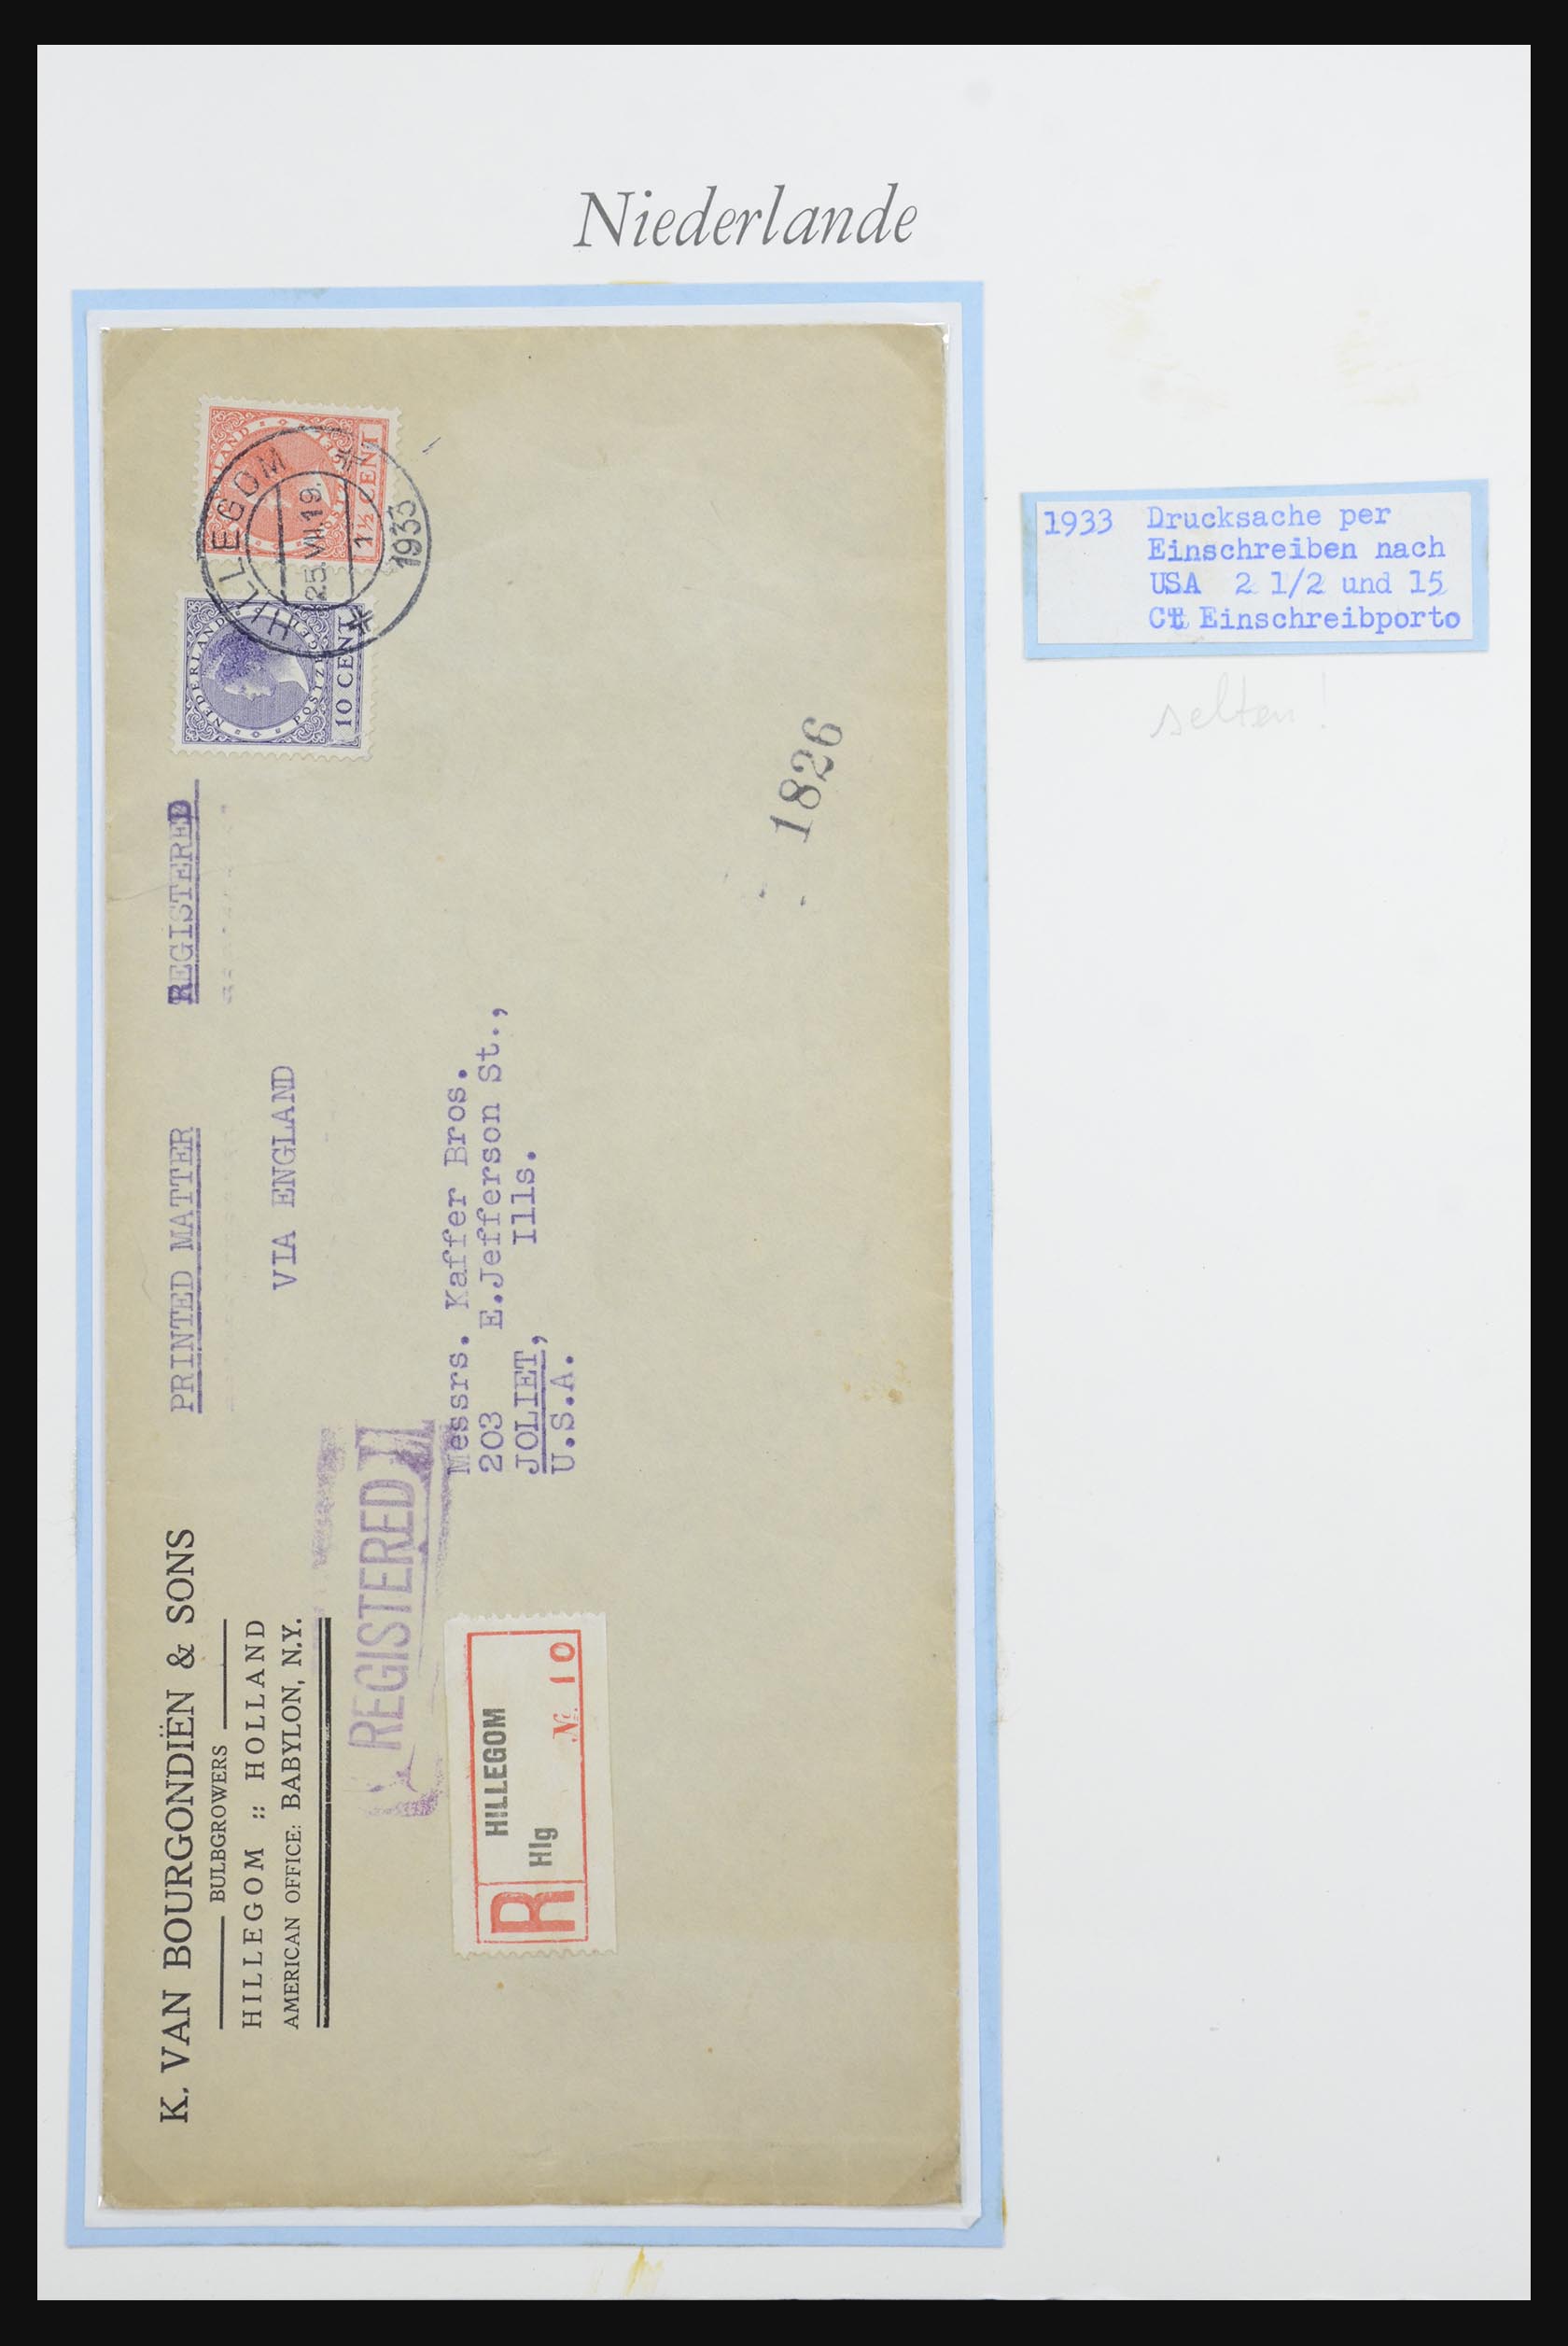 32159 012 - 32159 Netherlands covers 1925-1946.